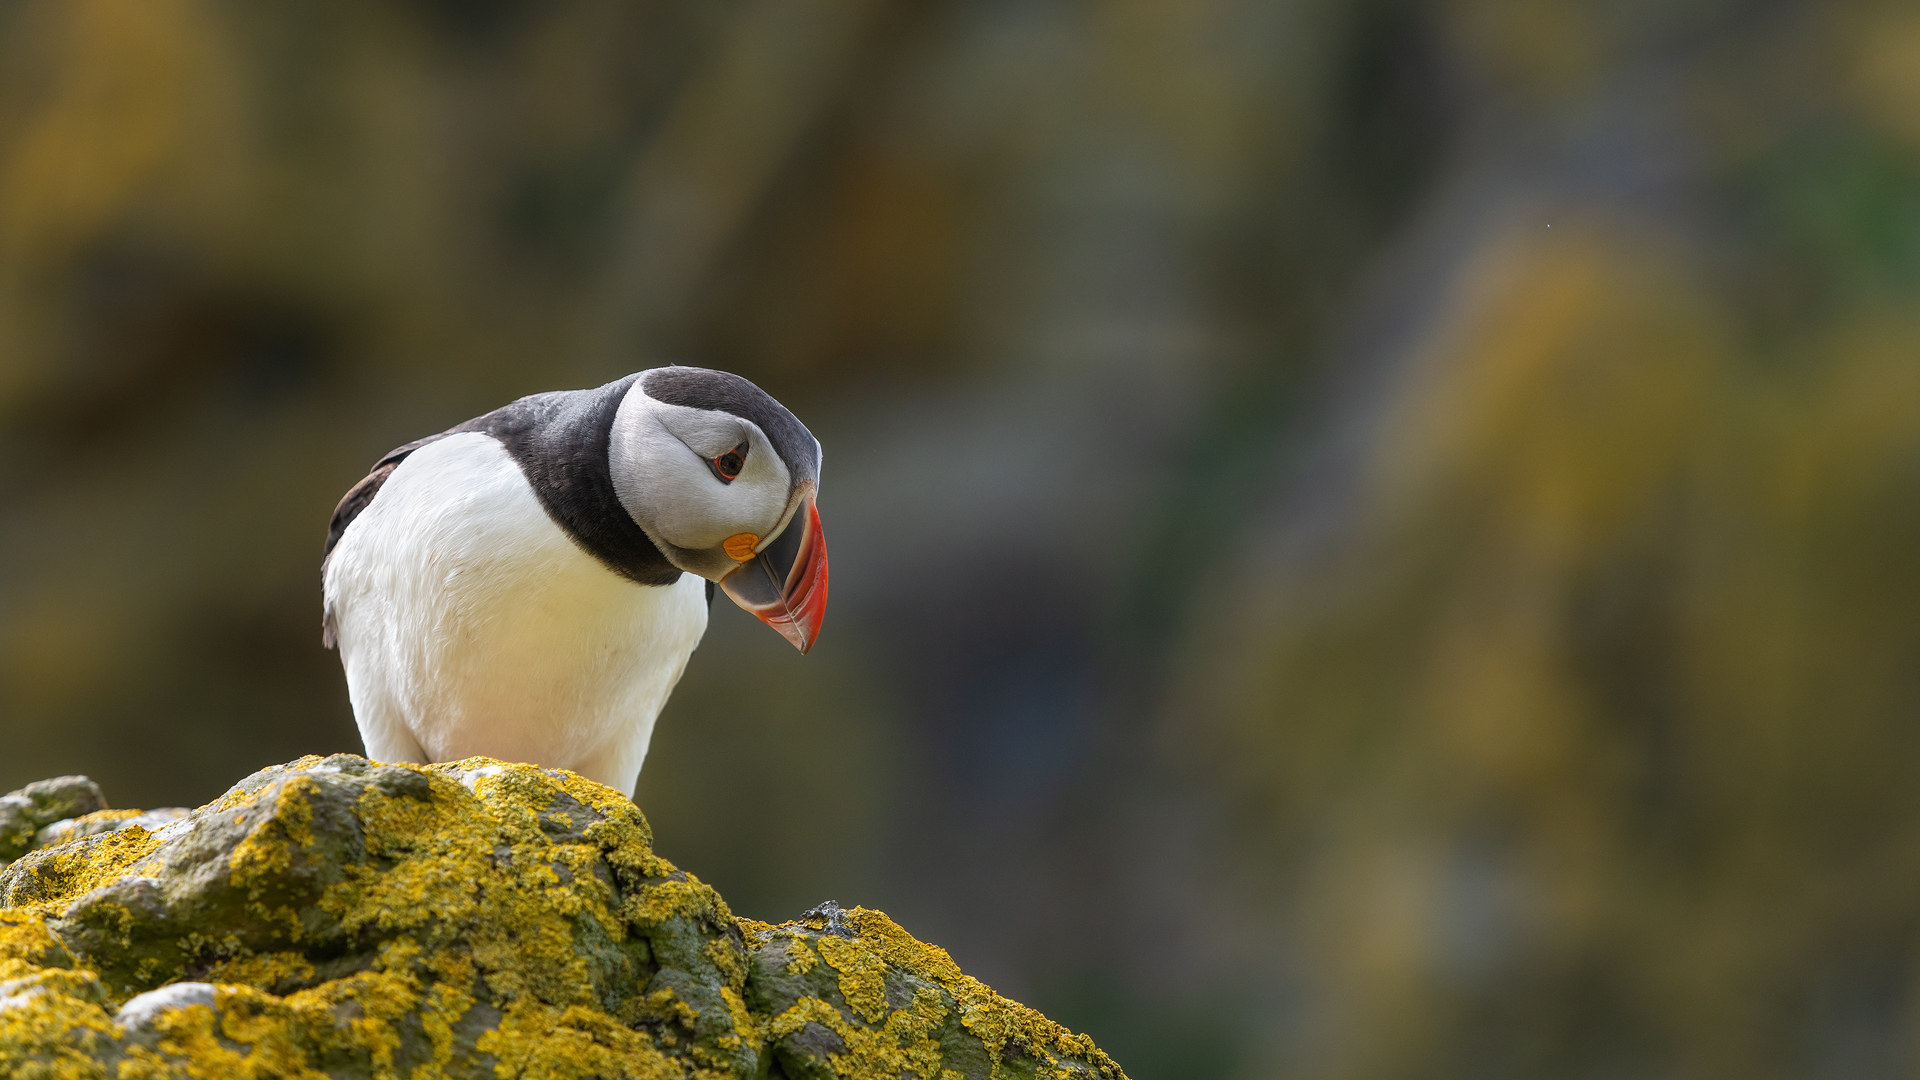 Puffin in warm light